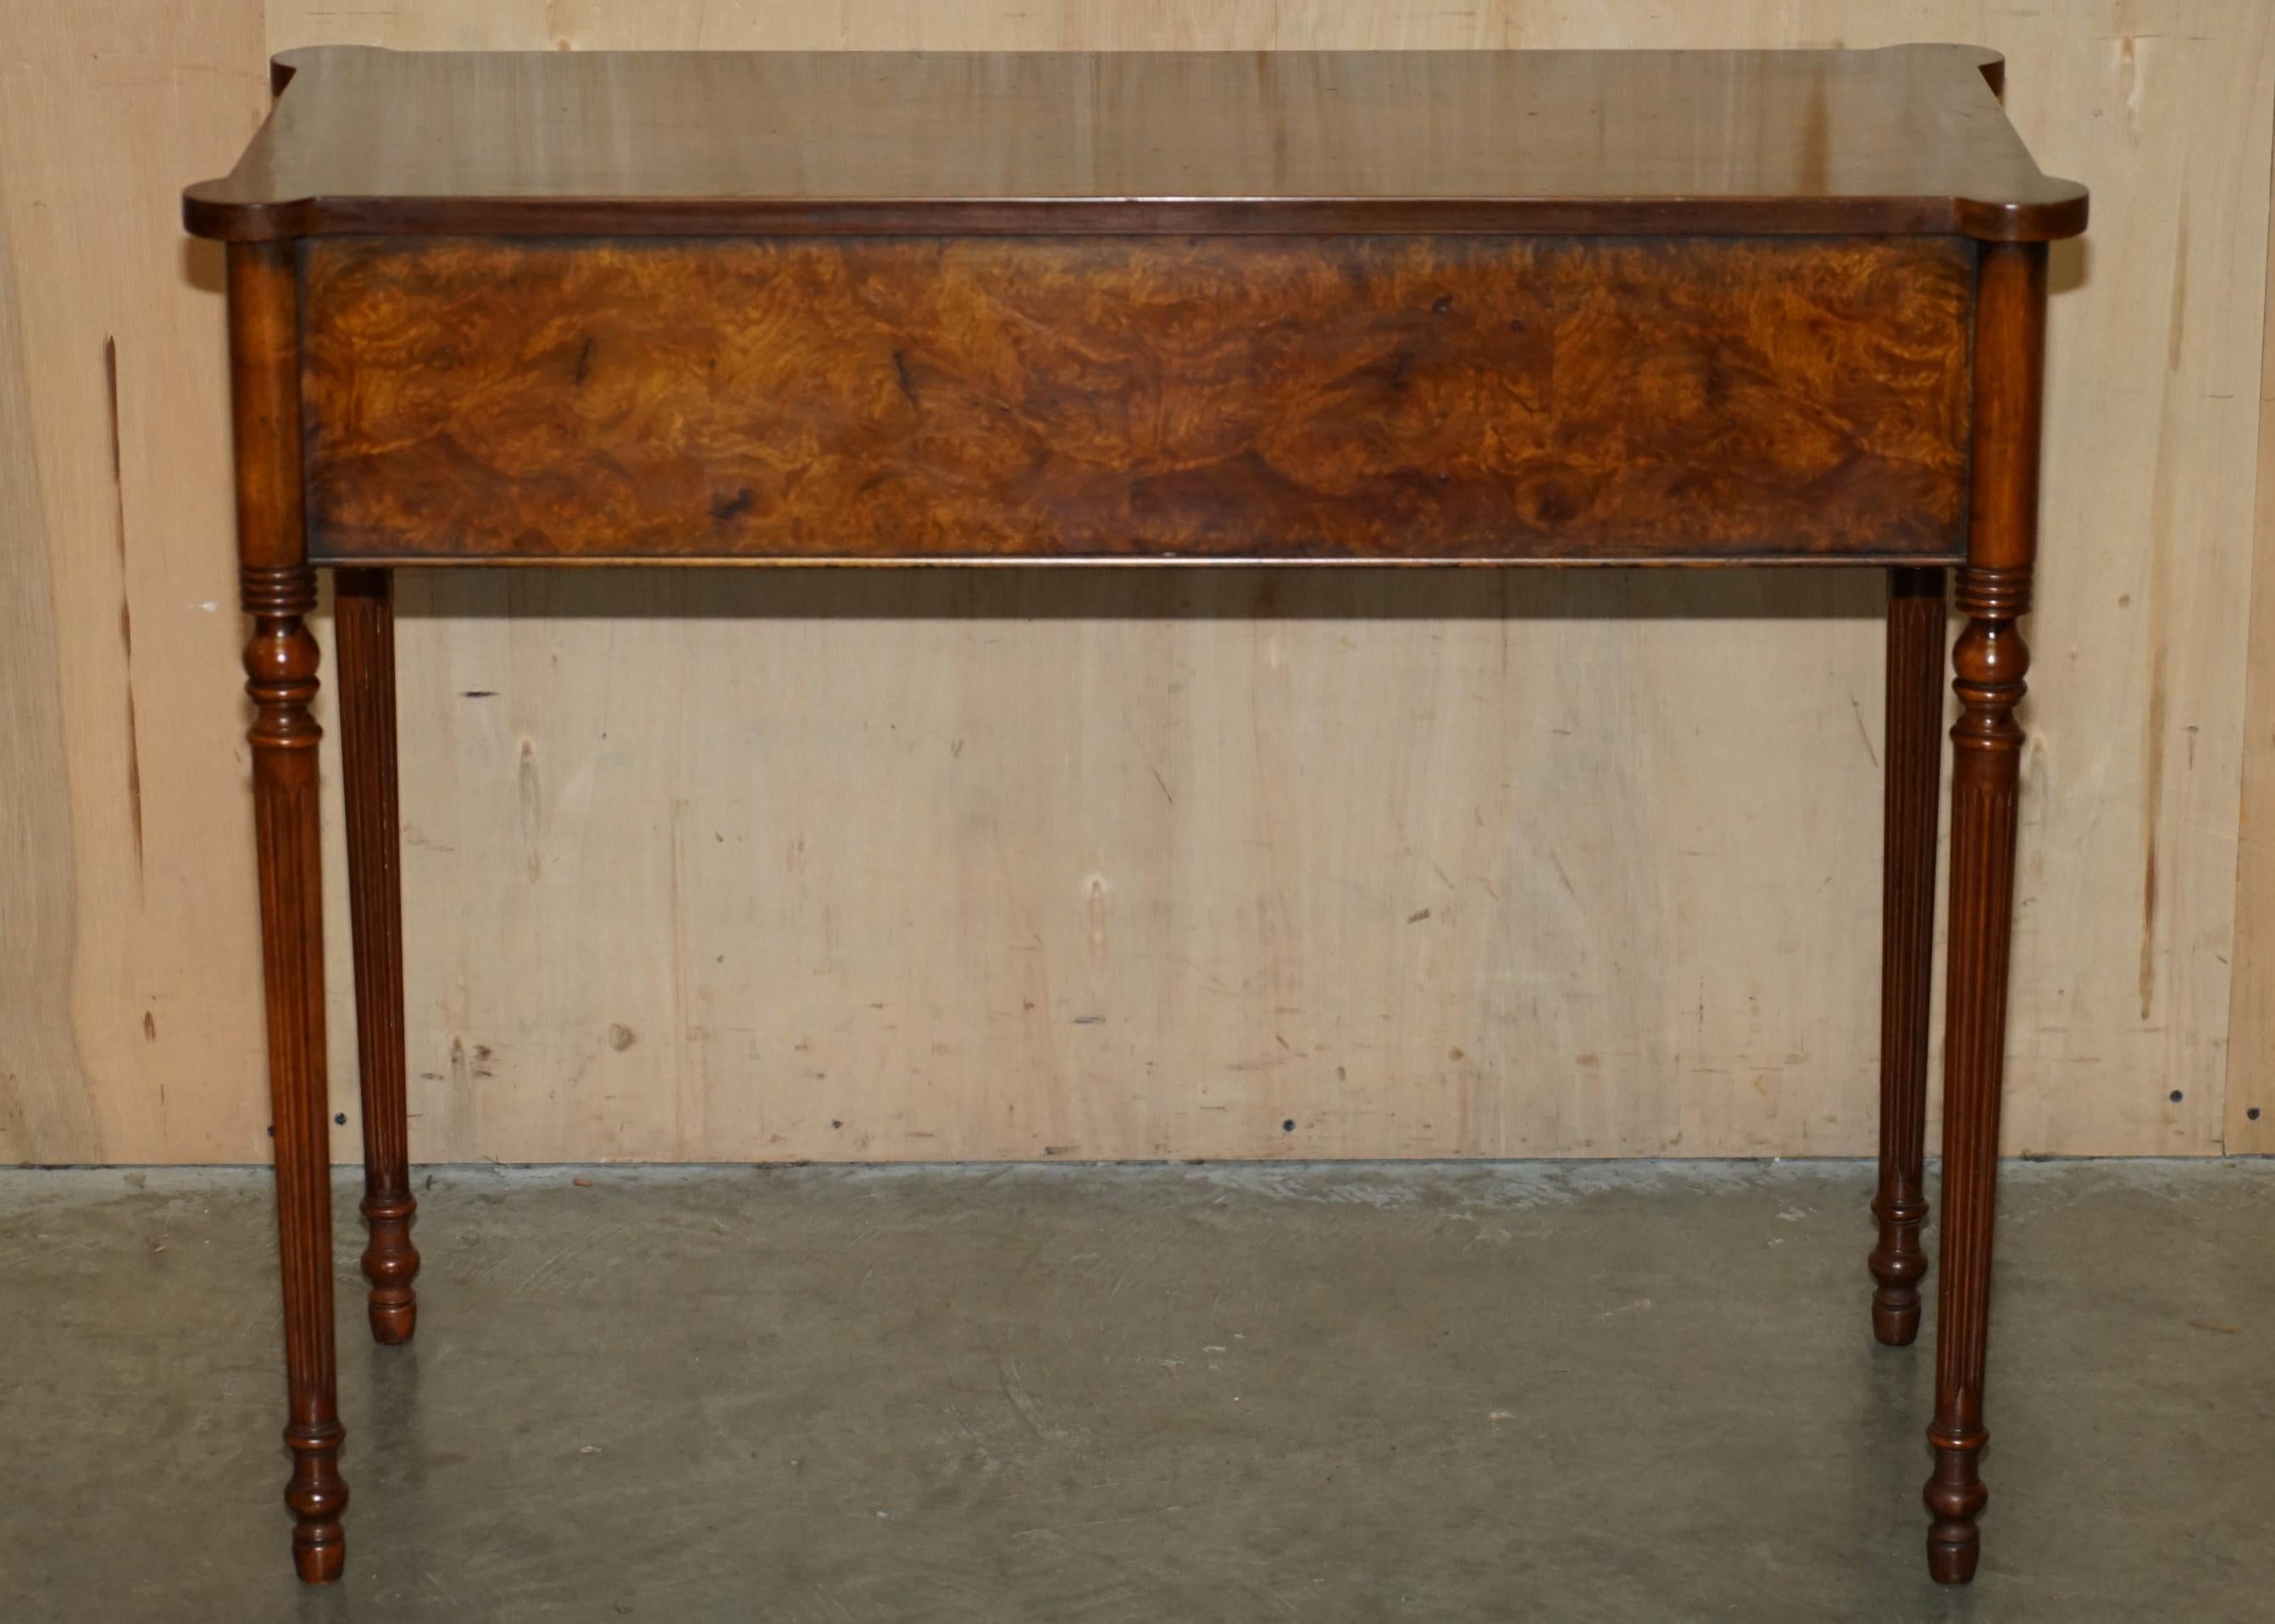 EXQUISITE CIRCA 1920 BURR ELM & SATiNWOOD FRENCH POLISHED RESTORED CONSOLE TABLE im Angebot 8